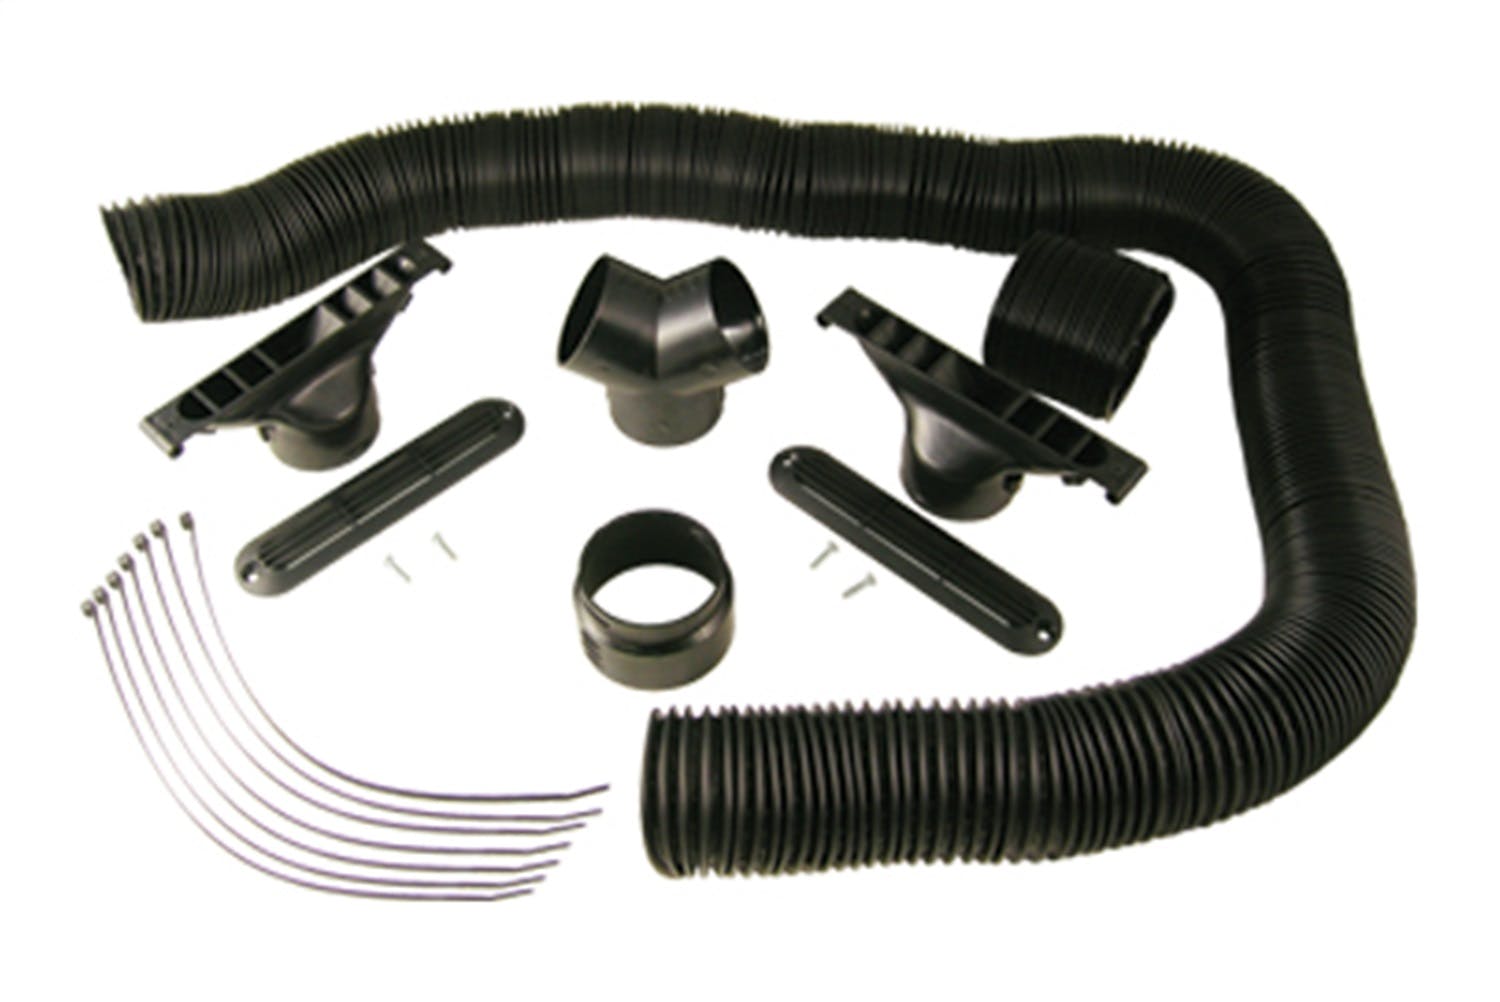 Maradyne MFA128 Defrost kit - (2) defrost chutes/grilles, 10 flexhose and tie wraps